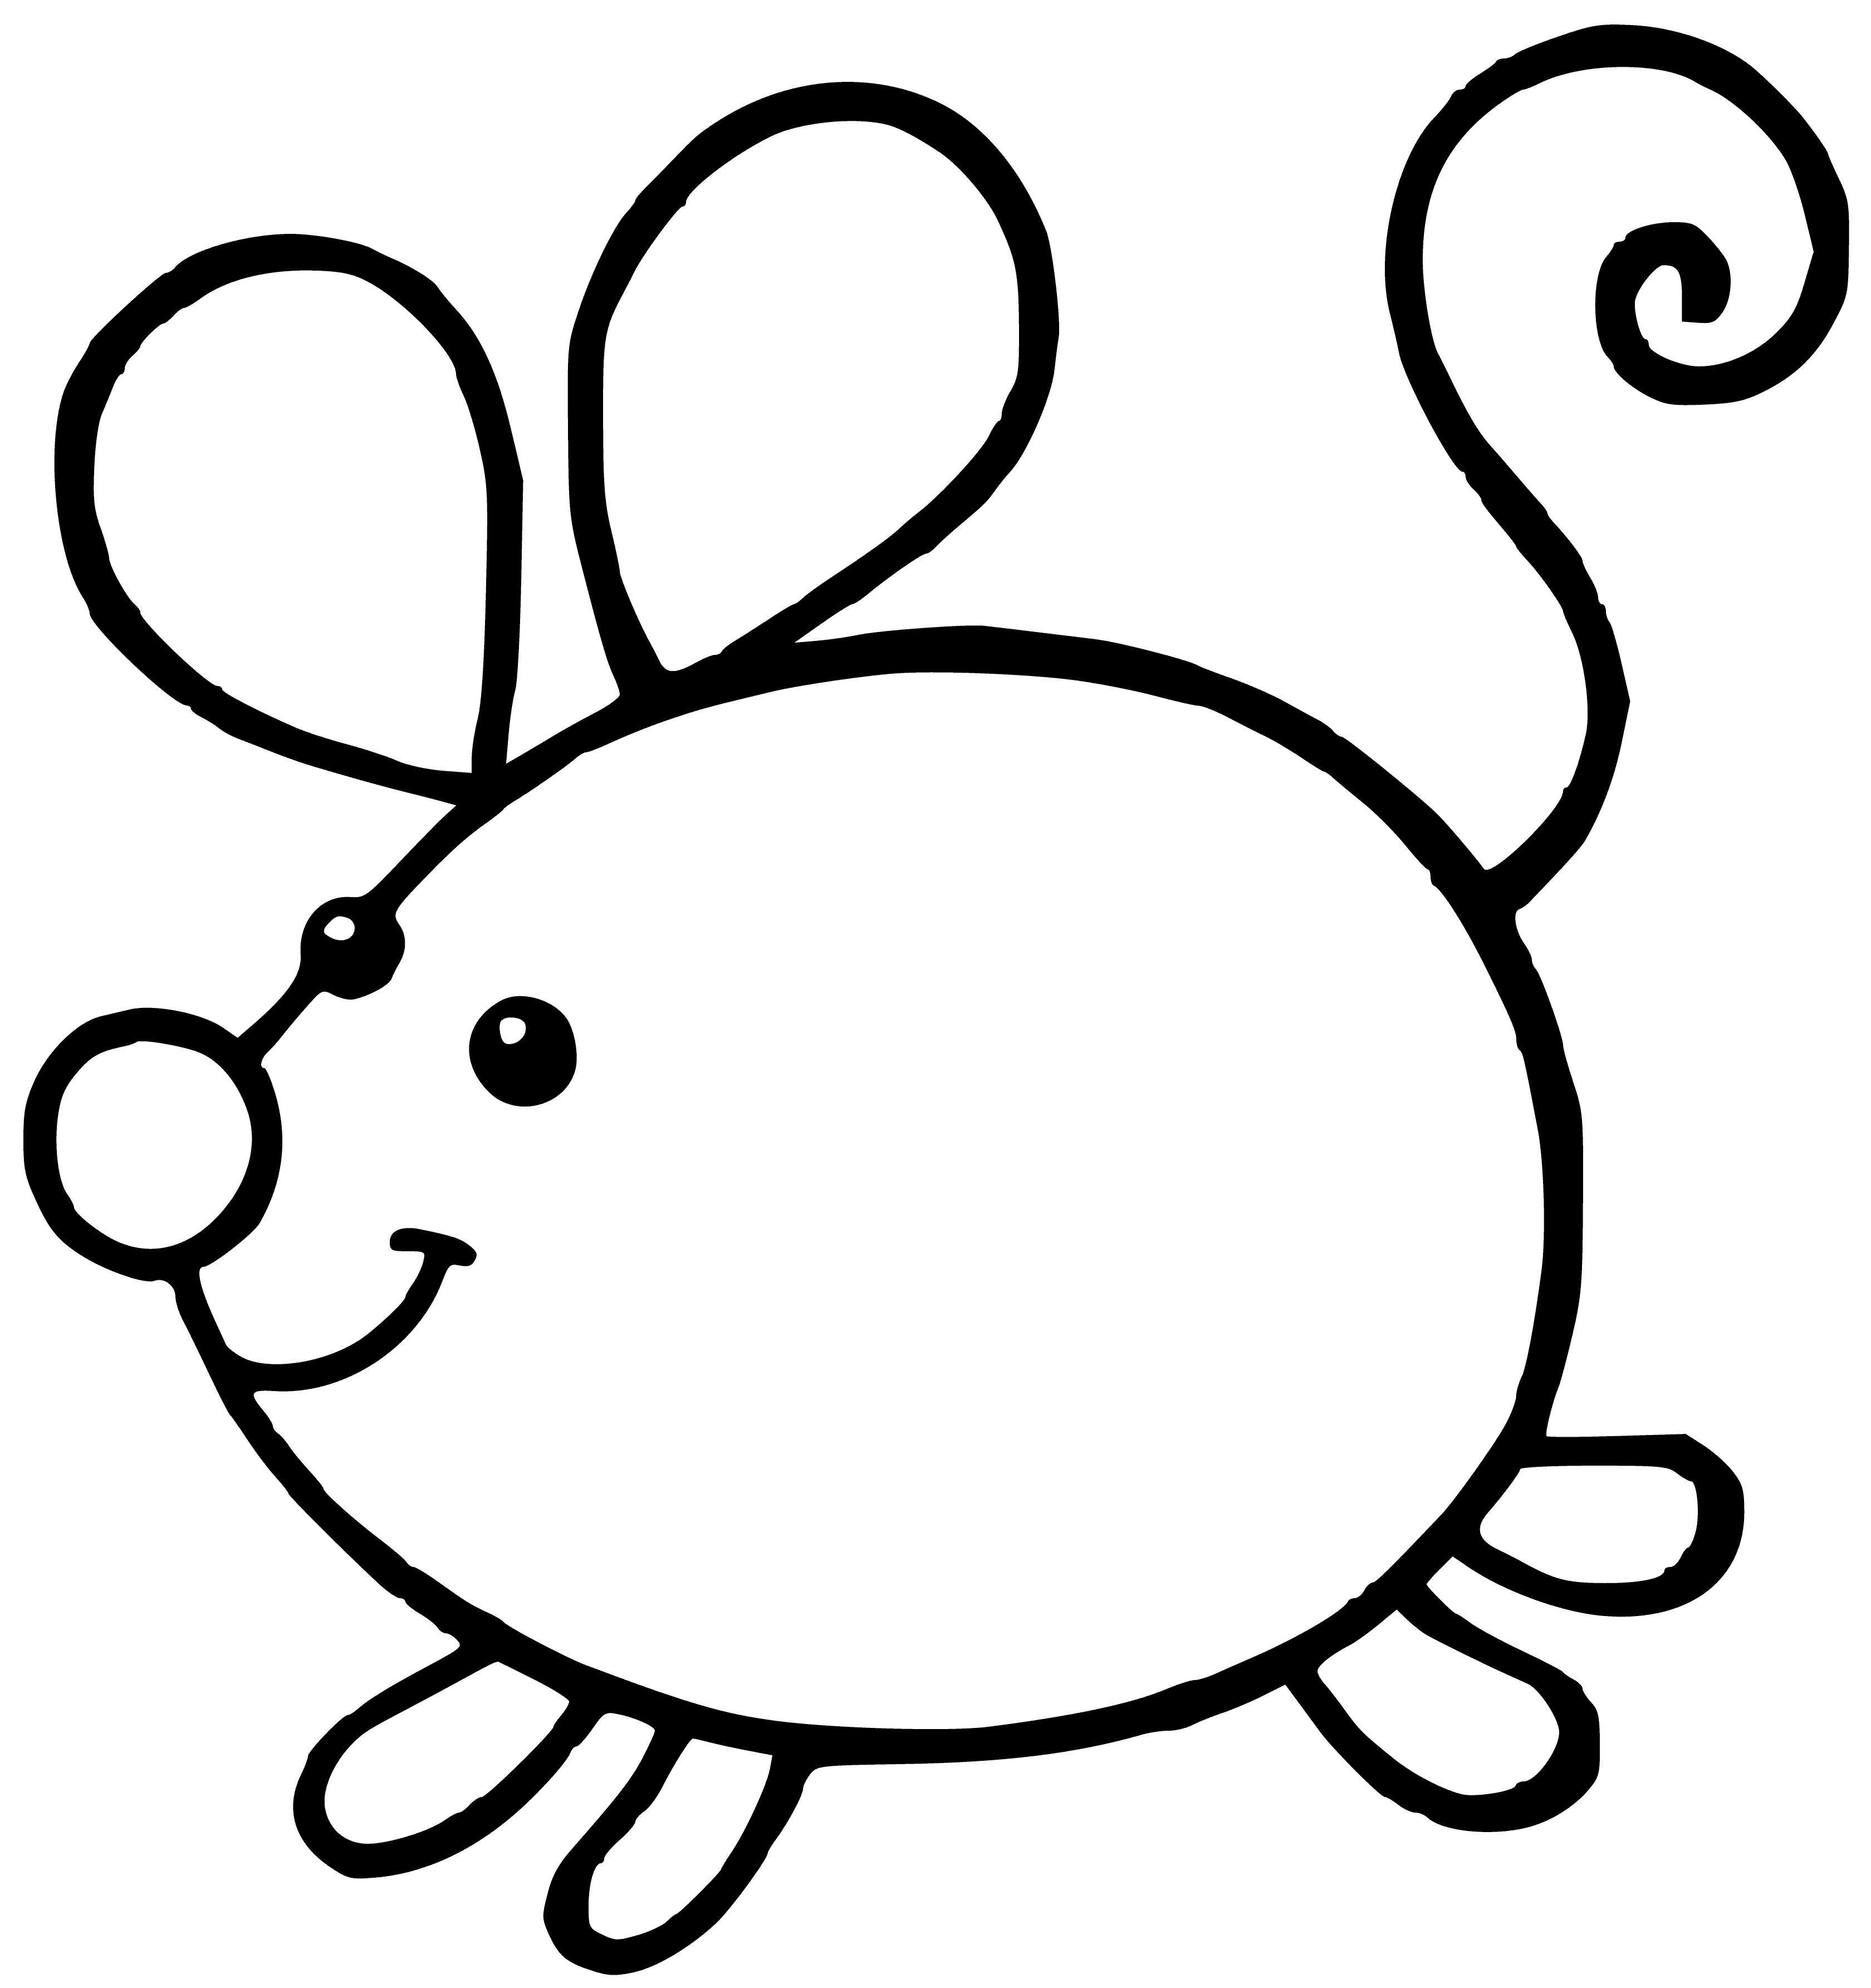 coloring page: Mouse running through green meadow filled with flowers & bees; brown body & long tail. #nature #animals